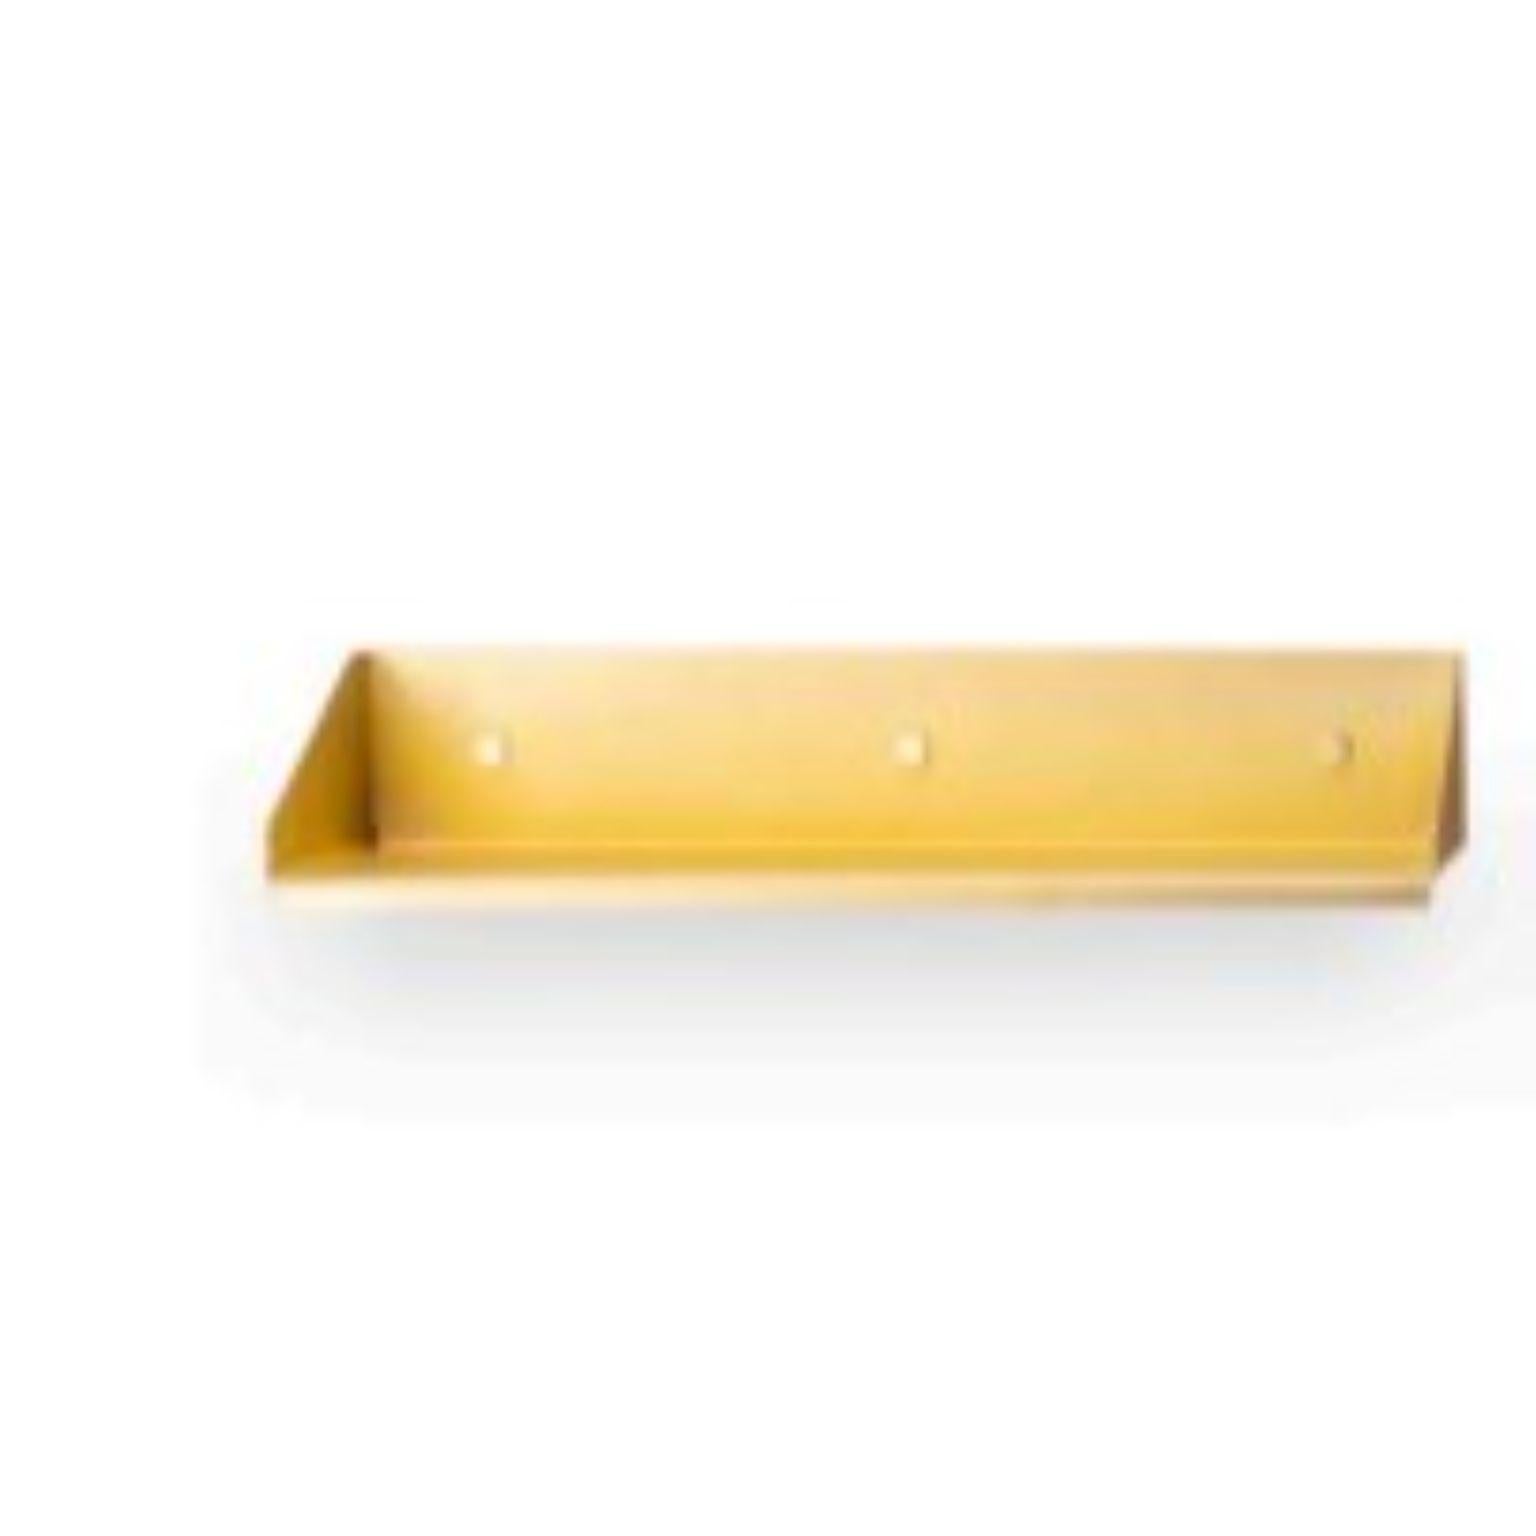 Bendy small shelf by Mingardo
Dimensions: D55 x W25 x H10 cm 
Materials: Matt brass plated stainless steel
Weight: 5 kg

Also Available in different finishes and dimensions.

Bendy is a shelf made of a single stainless steel foil, folded and